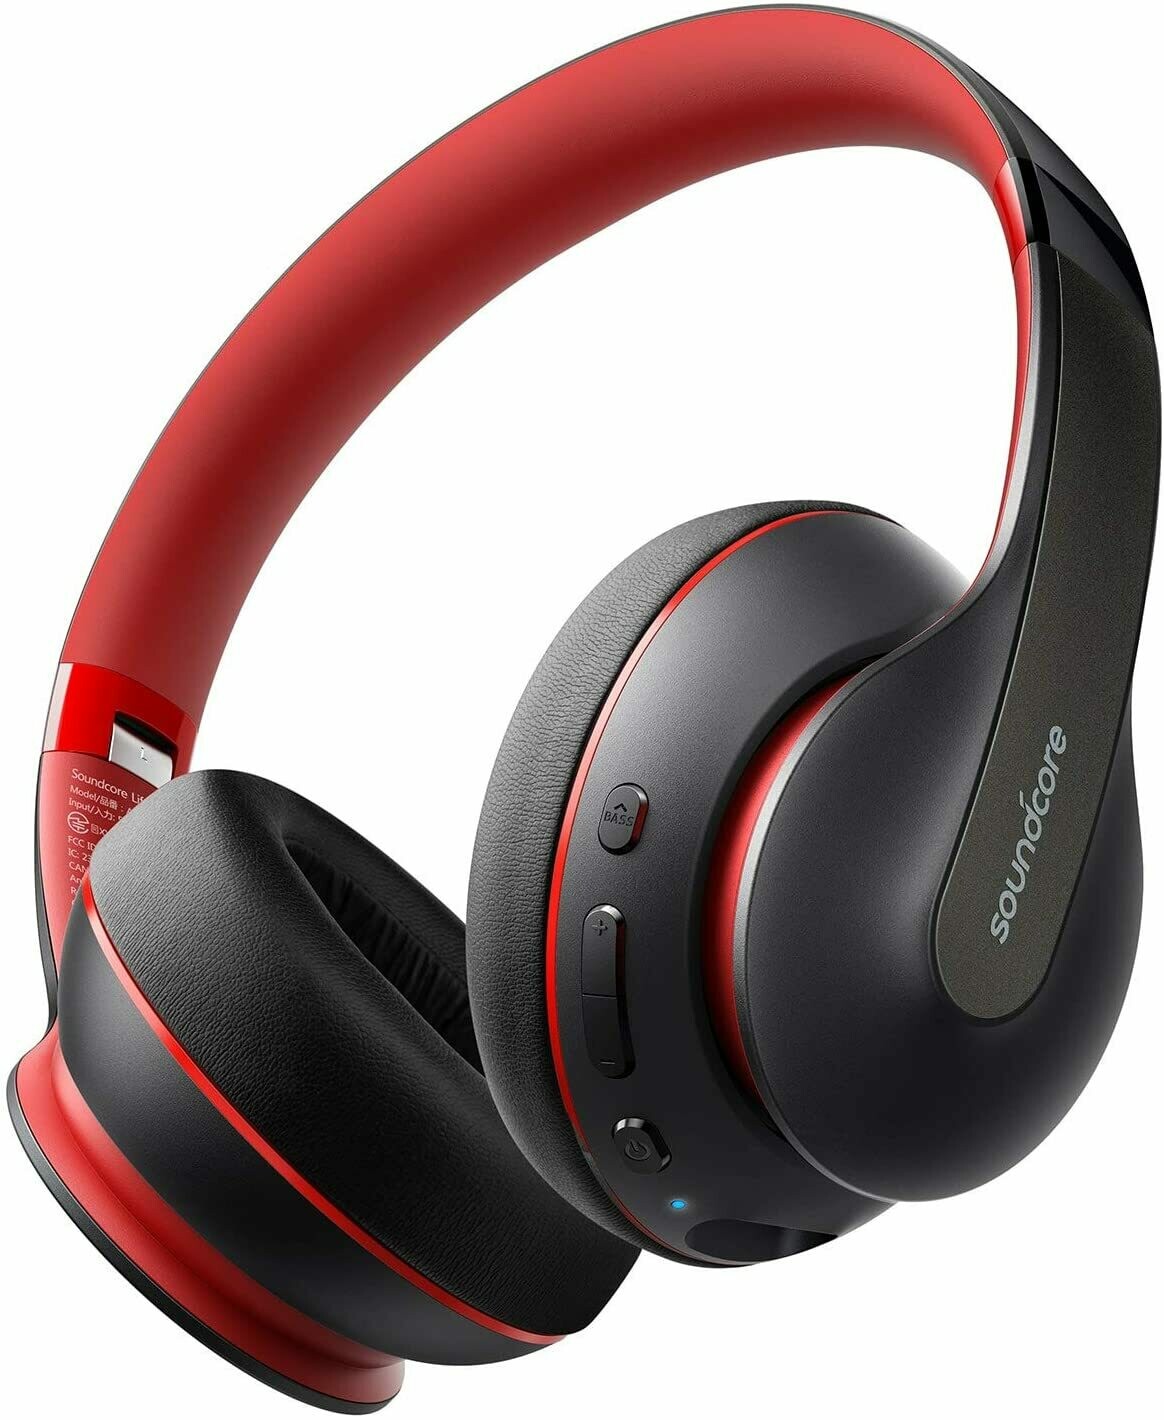 Anker Soundcore Life Q10 Wireless Bluetooth Headphones, Over Ear and Foldable, Hi-Res Certified Sound, 60-Hour Playtime and Fast USB-C Charging, Deep Bass, AUX Input.